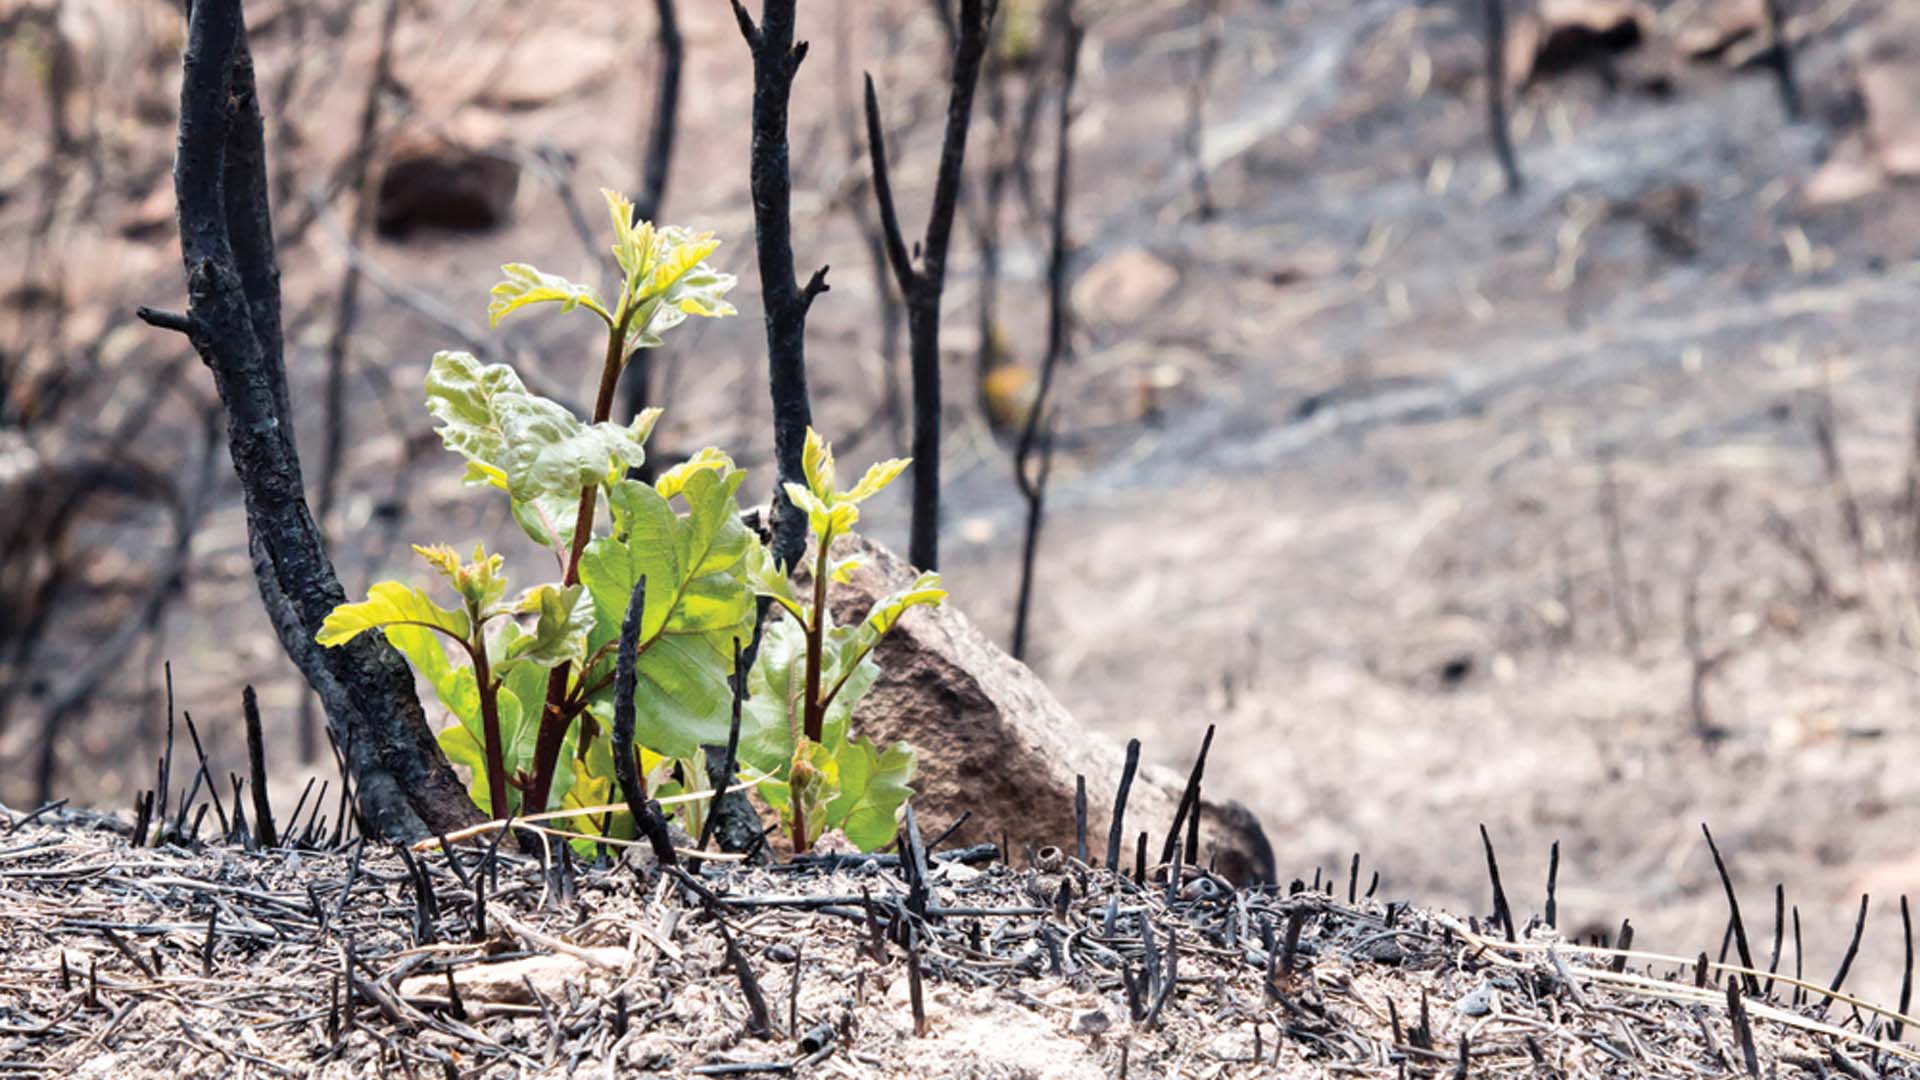 Life begins to come back to a Colorado forest after a fire